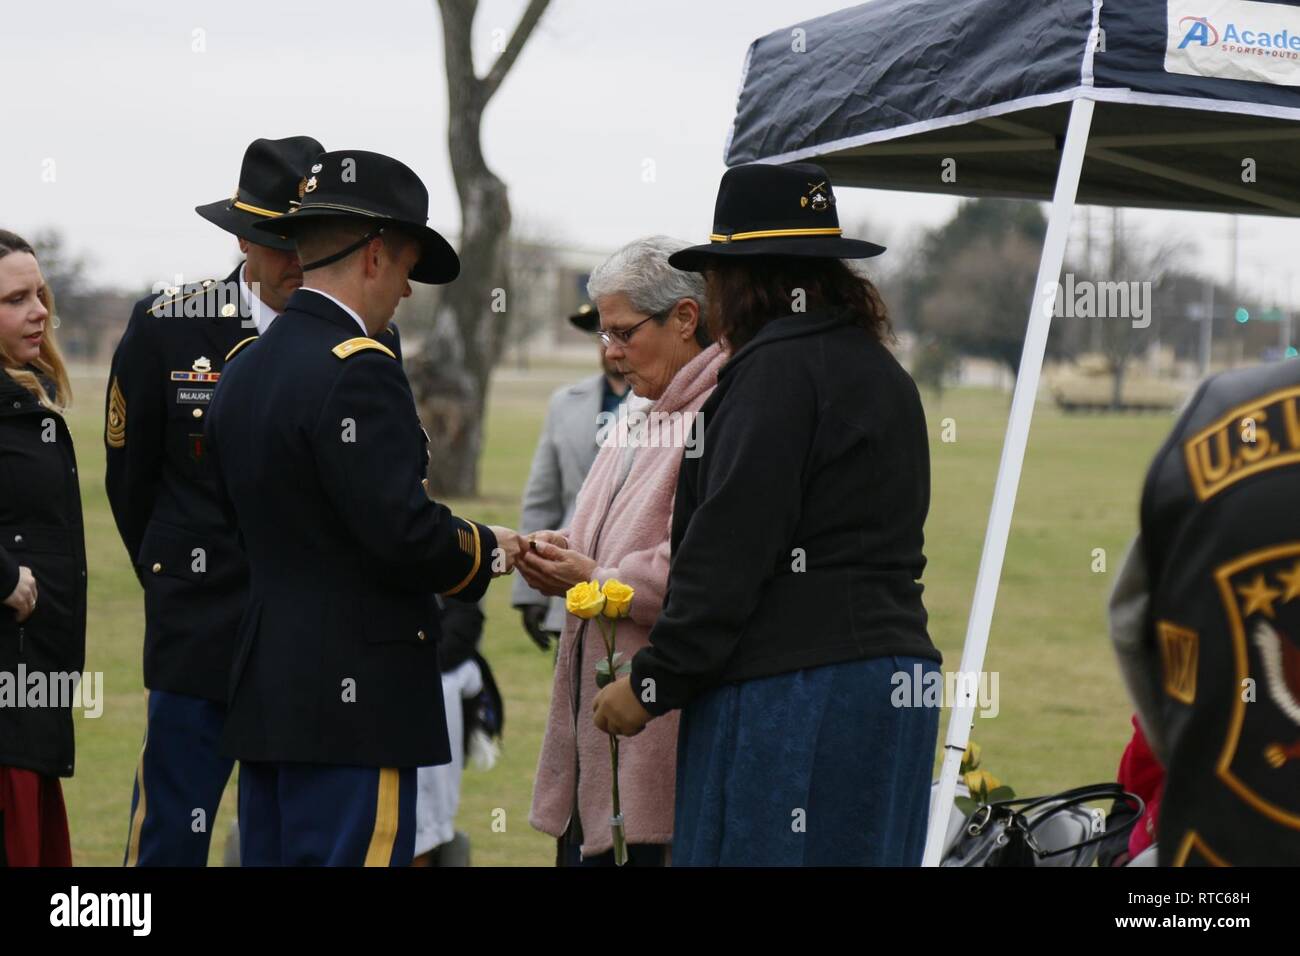 Lt. Col. Kevin Black, battalion commander, offers a coin to Goldstar Mothers Ms. Patti Ward and Ms. Cathy Mcfarlane. Their sons along with two other Soldiers were killed Feb. 9, 2009. Lt. Col. Gary Derby, Sgt. Joshua Ward, Pvt. 1st Class Albert Jex and Pvt. 1st Class Jonathan Roberge were killed when a vehicle borne improvised explosive device hit their vehicle. Derby was the battalion commander for 3rd Battalion, 8th Cavalry Regiment, 3rd Armored Brigade Combat Team, 1st Cavalry Division and the three Soldiers were part of his security detachment. Stock Photo